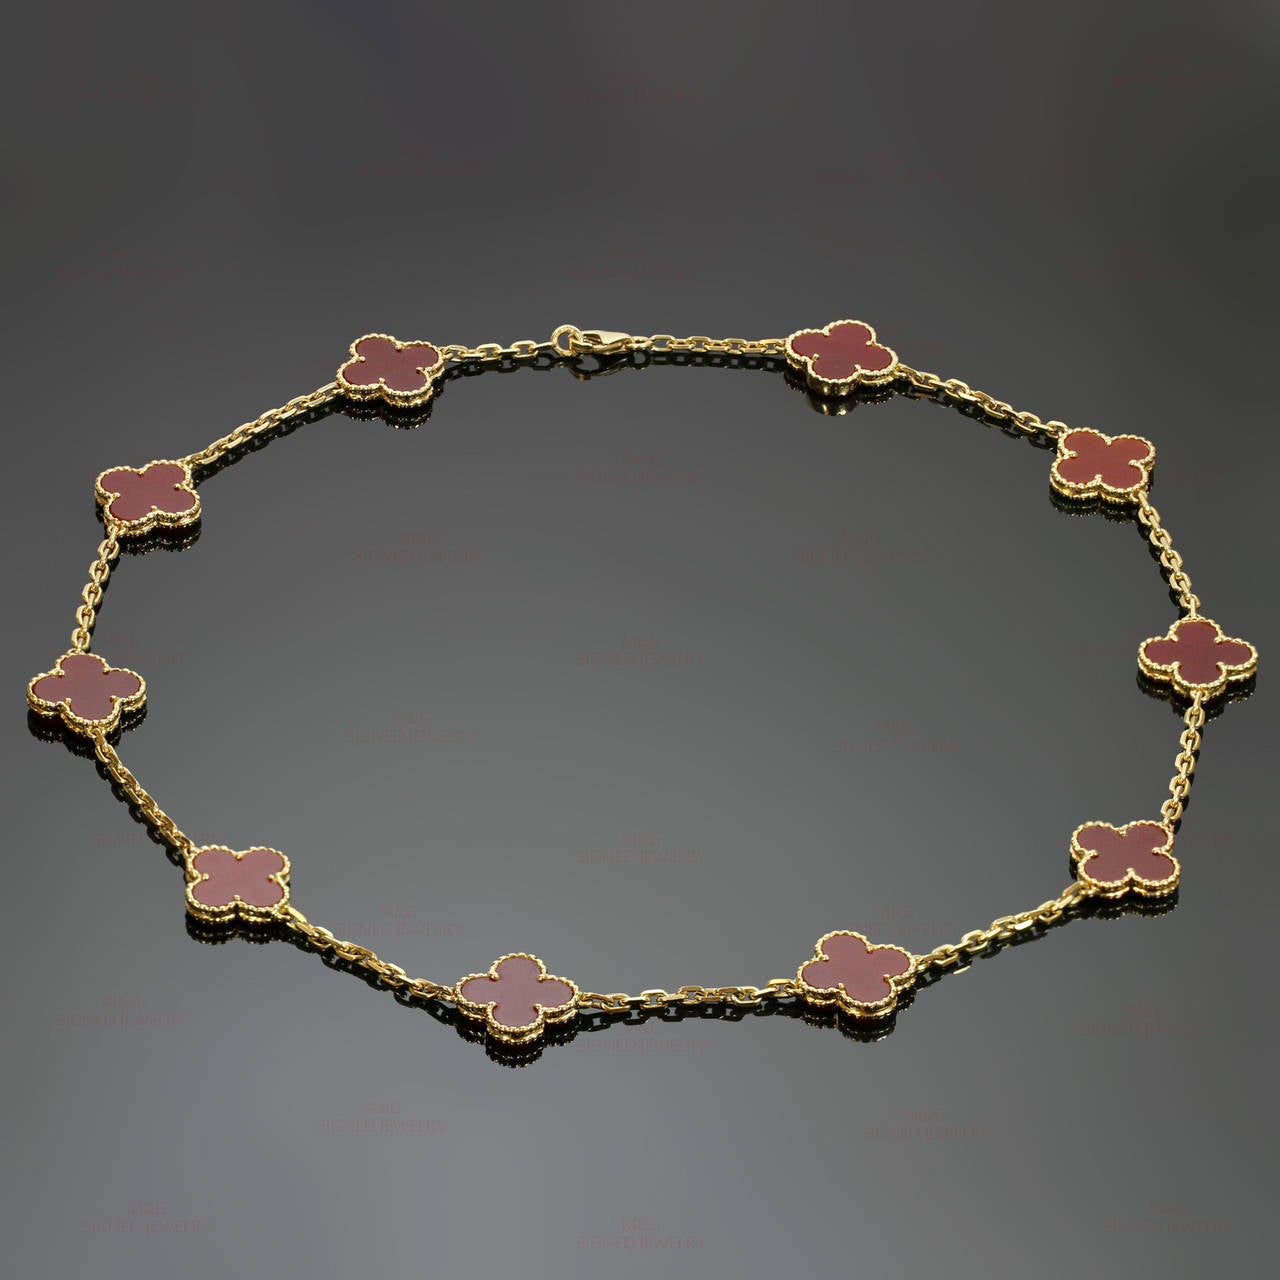 This classic Van Cleef & Arpels necklace is crafted in 18k yellow gold and features 10 icons of luck from the Vintage Alhambra collection made of red carnelian in round bead settings. Simply stunning. Measurements: 0.55